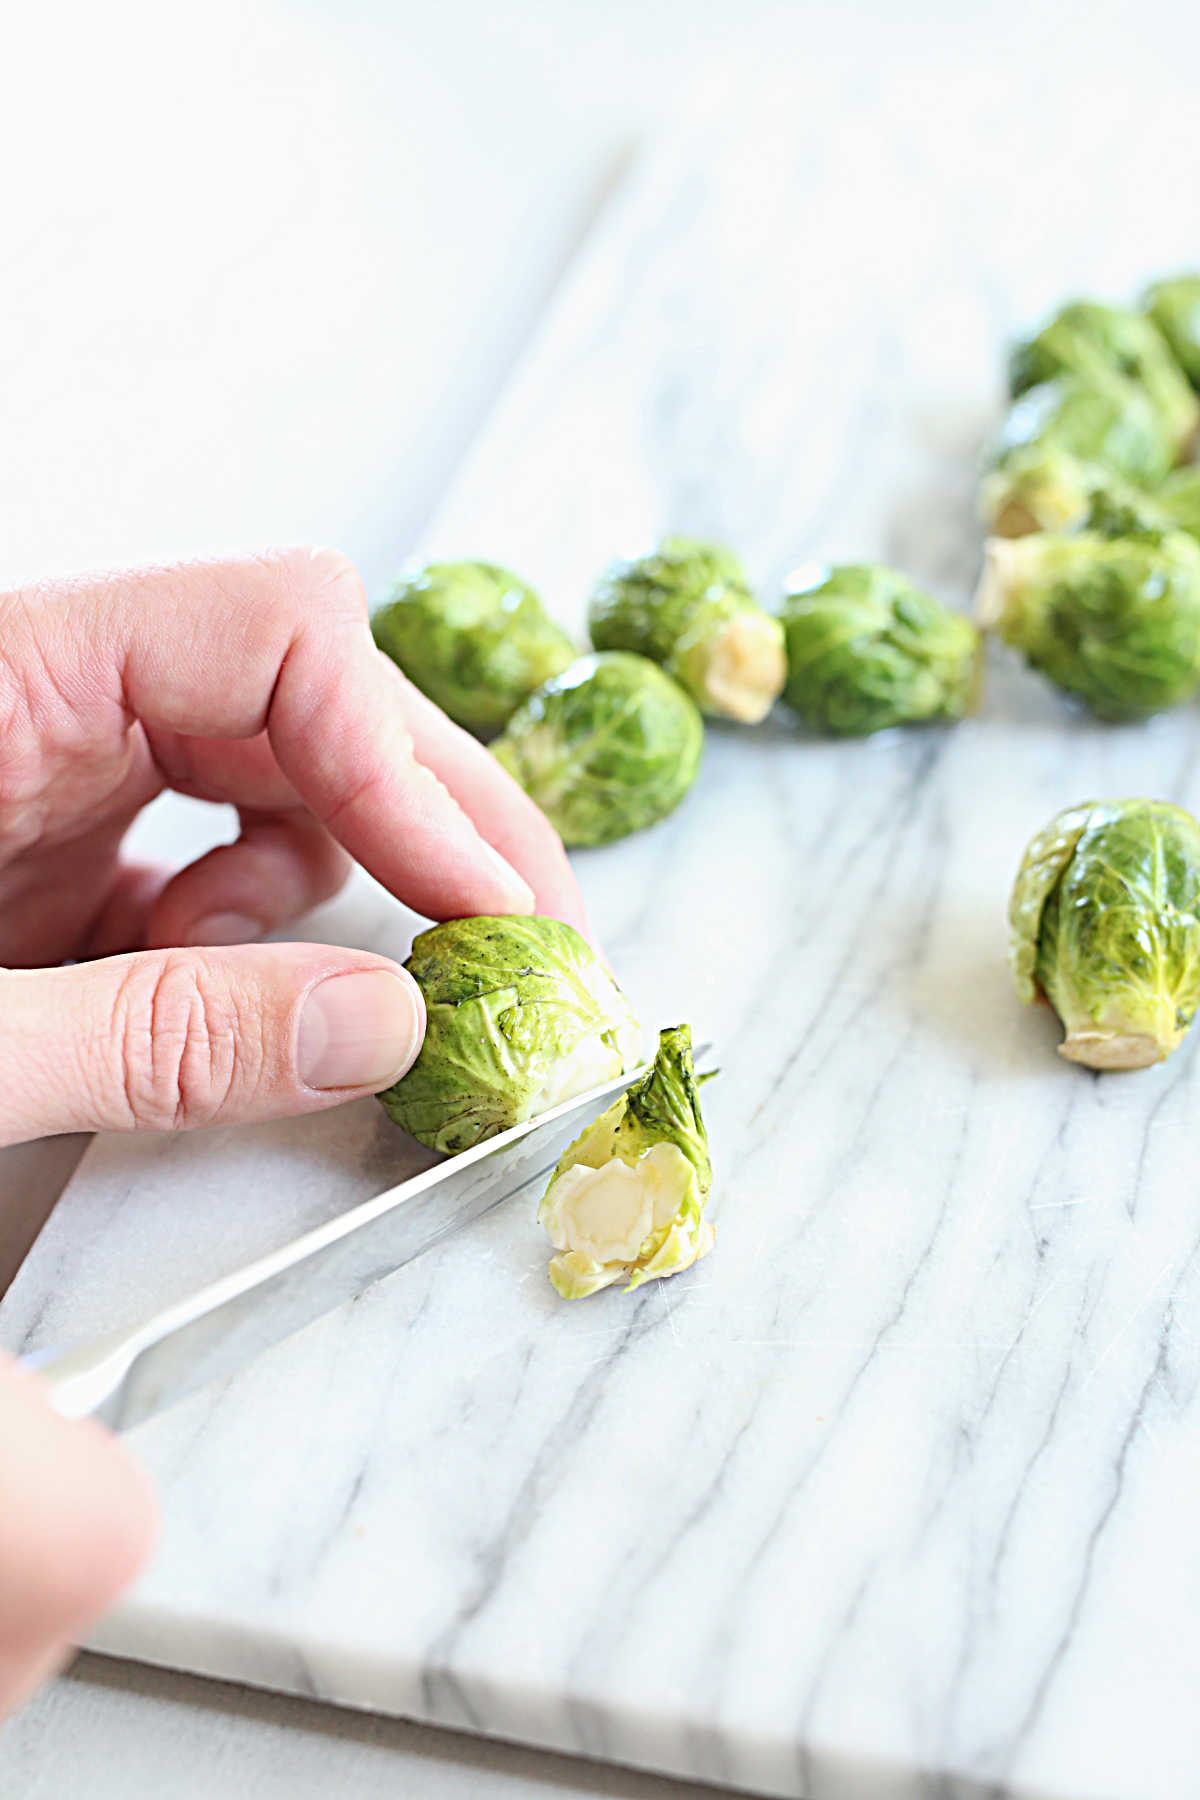 hands holding a knife demonstrating how to cut and trim brussels sprouts from the top to bottom